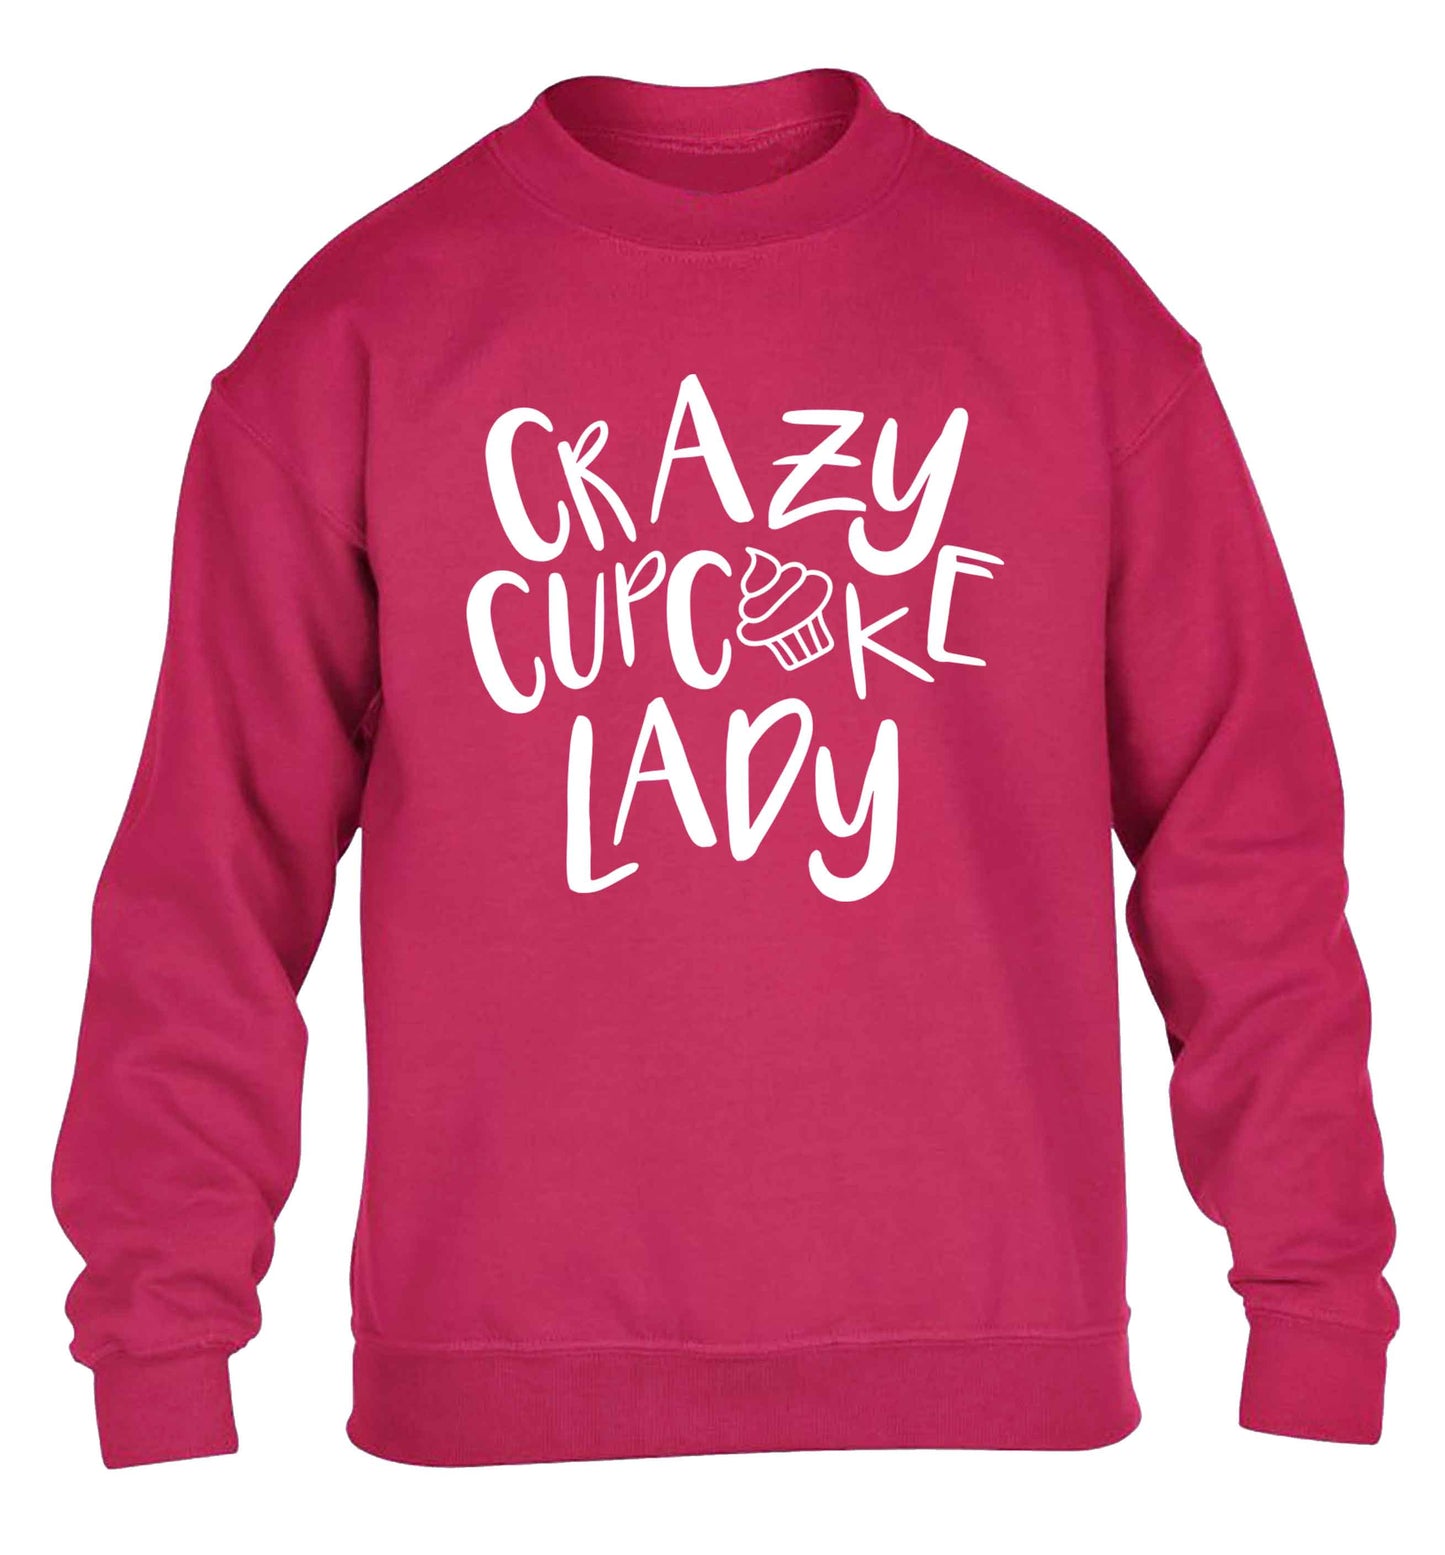 Crazy cupcake lady children's pink sweater 12-13 Years